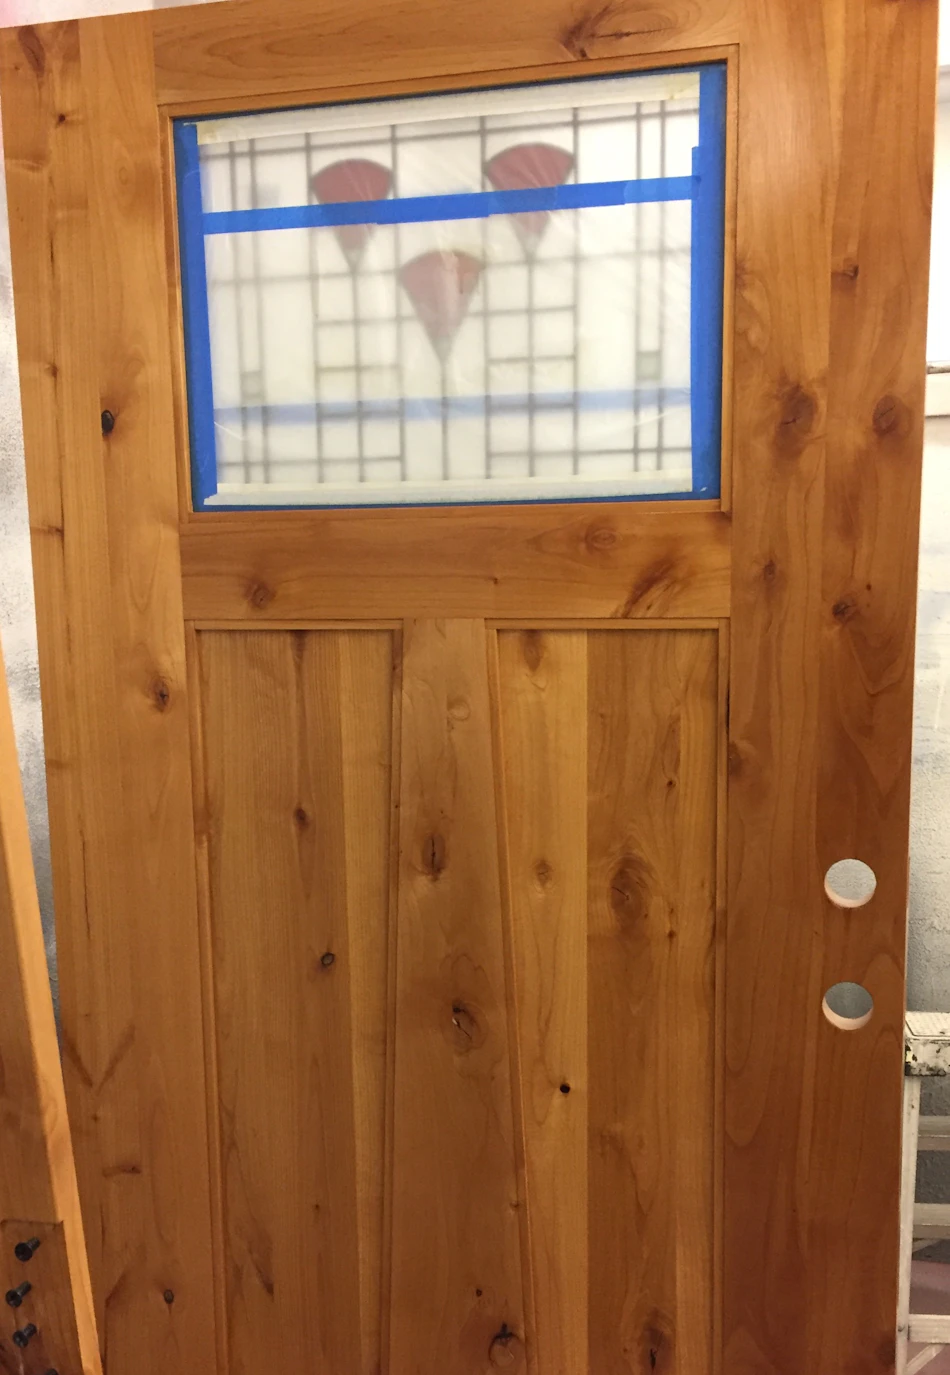  To Stain or Not to Stain… a Front Door Dilemma!